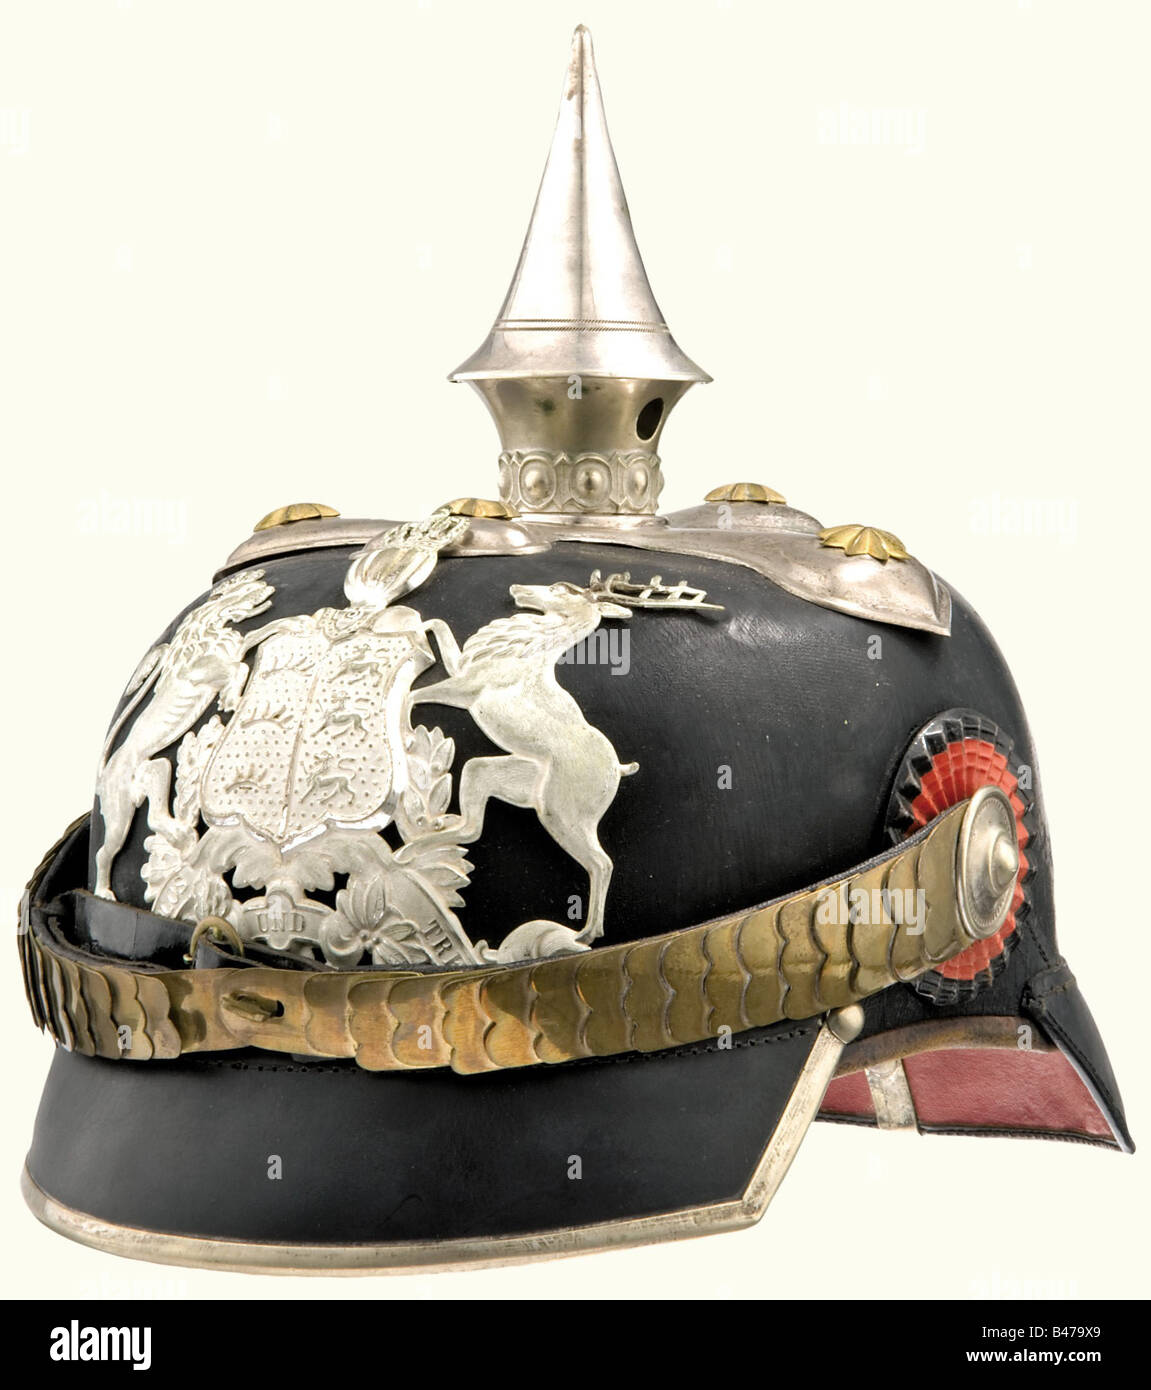 A helmet, waist belt and bowler hat, for a Captain of the Grenadier Regiment Queen Olga (1st Württemberg), No. 119 Stuttgart. An officer's helmet, with a black leather skull, silver mountings, a cross base with a small golden star, silvered, frosted front-plate with partially polished edges. Flat golden metal chinscales. Angular, silver trimmed visor, both cockades. Ribbed silk lining loose in places. Size 57. An officer's waist belt, silver weave with two black/red interweavings. Complete with buckle and slides. Length, ca. 95 cm. A black bowler hat in first c, Stock Photo